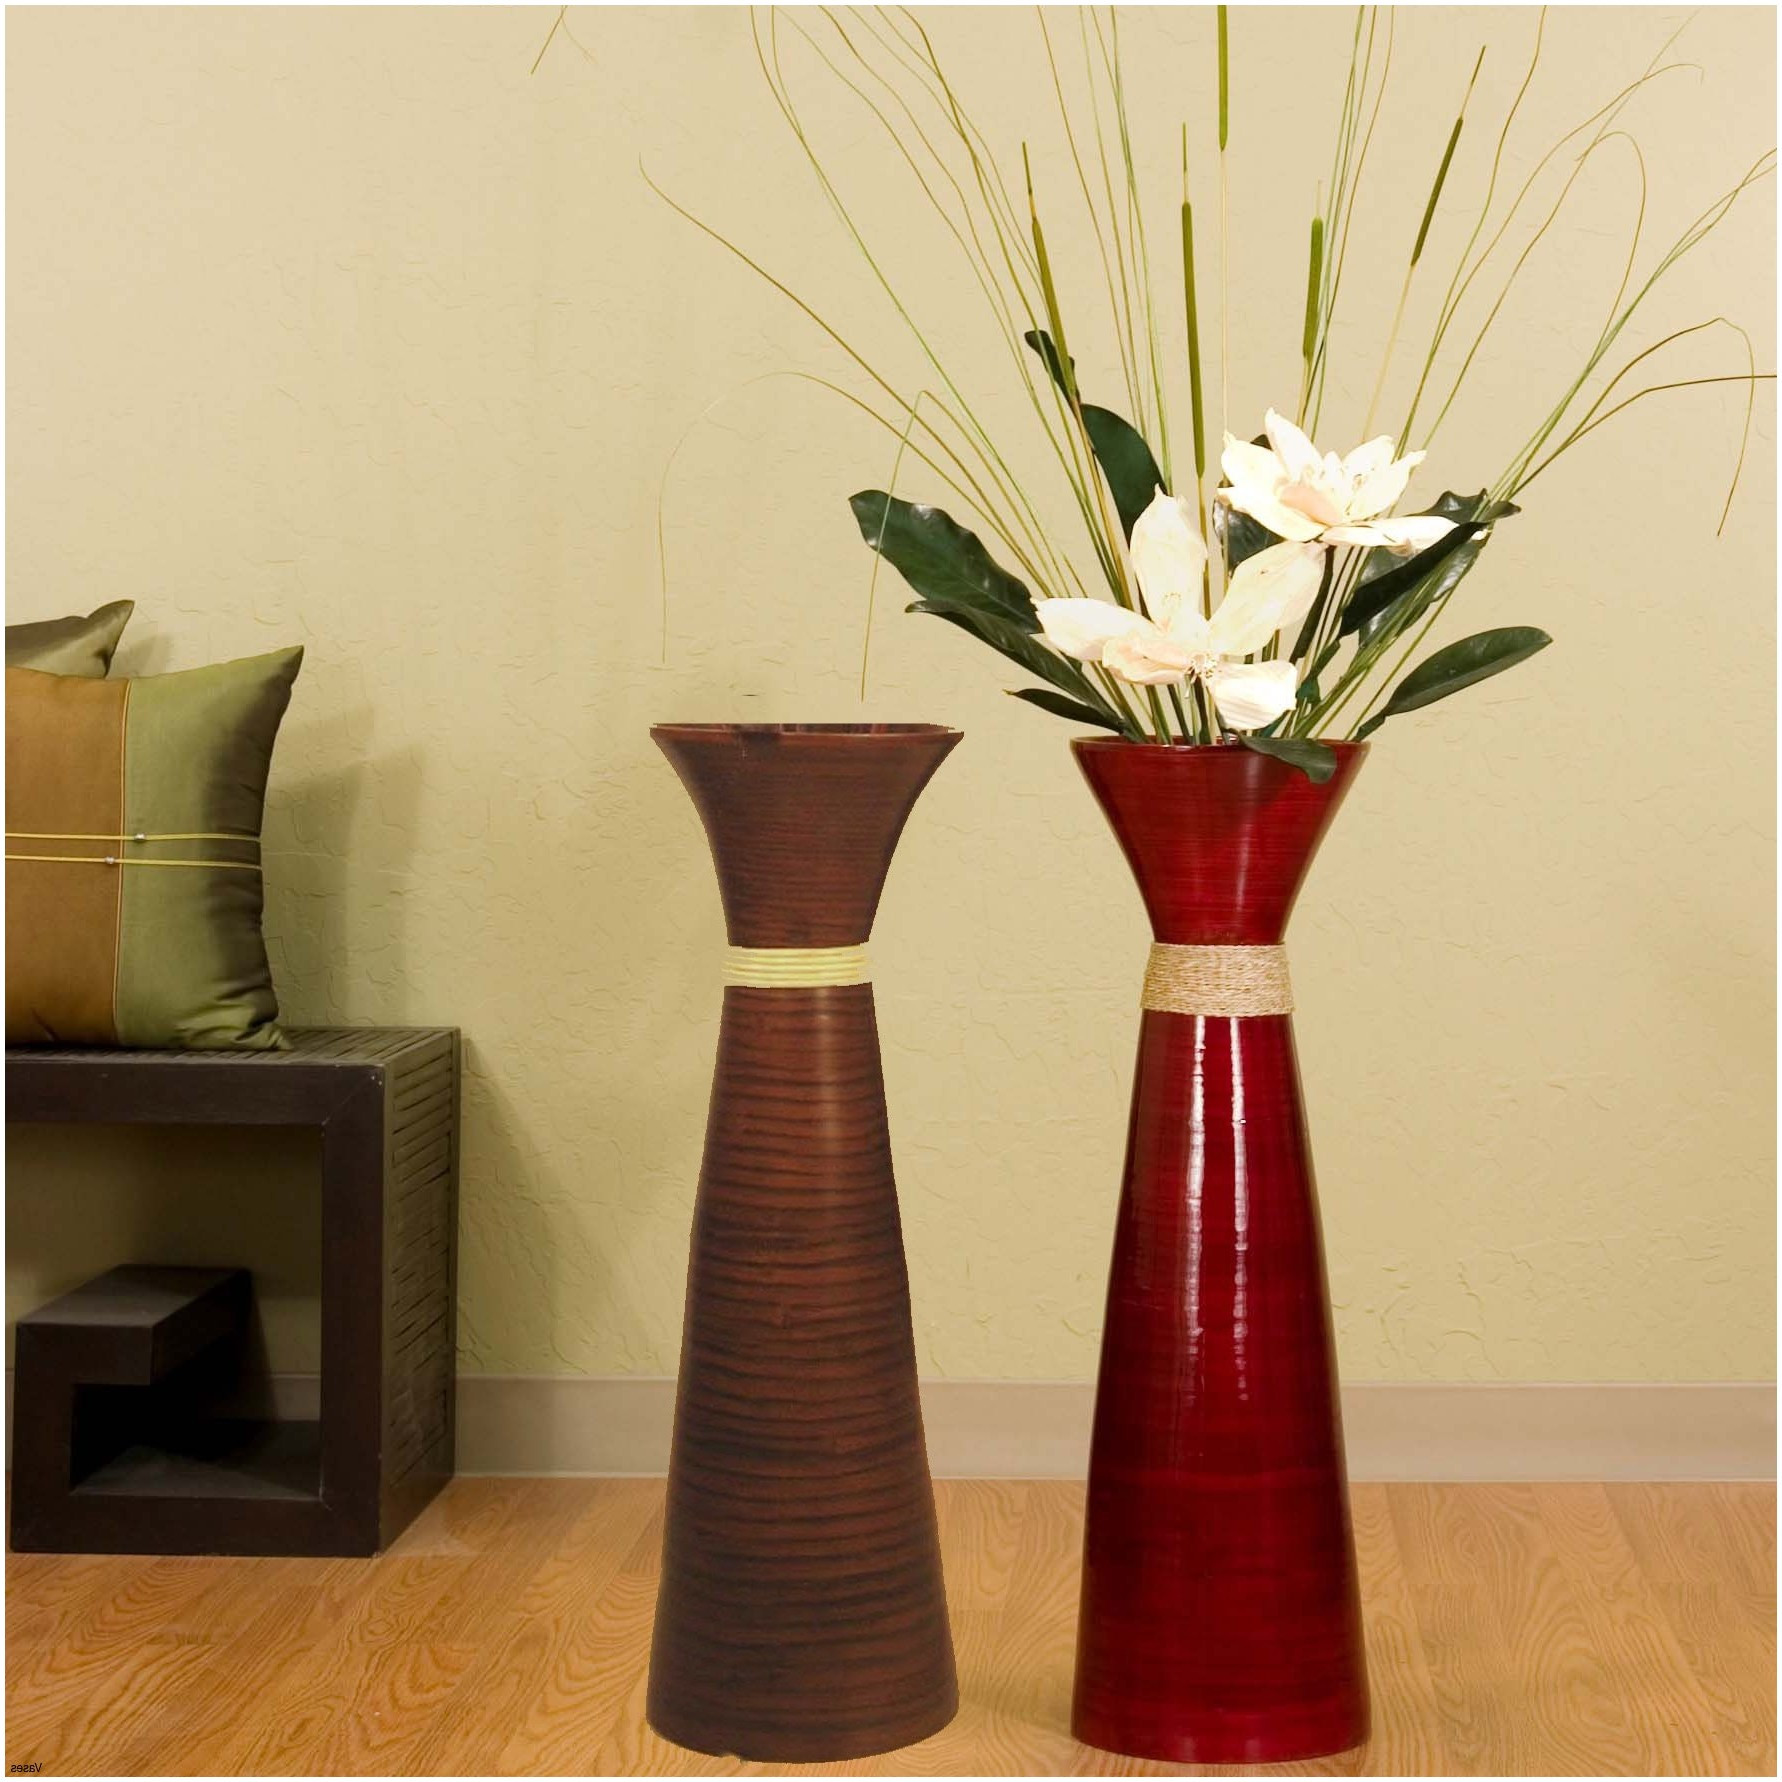 29 Ideal Tall Brown Floor Vases 2024 free download tall brown floor vases of 21 beau decorative vases anciendemutu org within floor vase colorsh vases red decorative image colorsi 0d